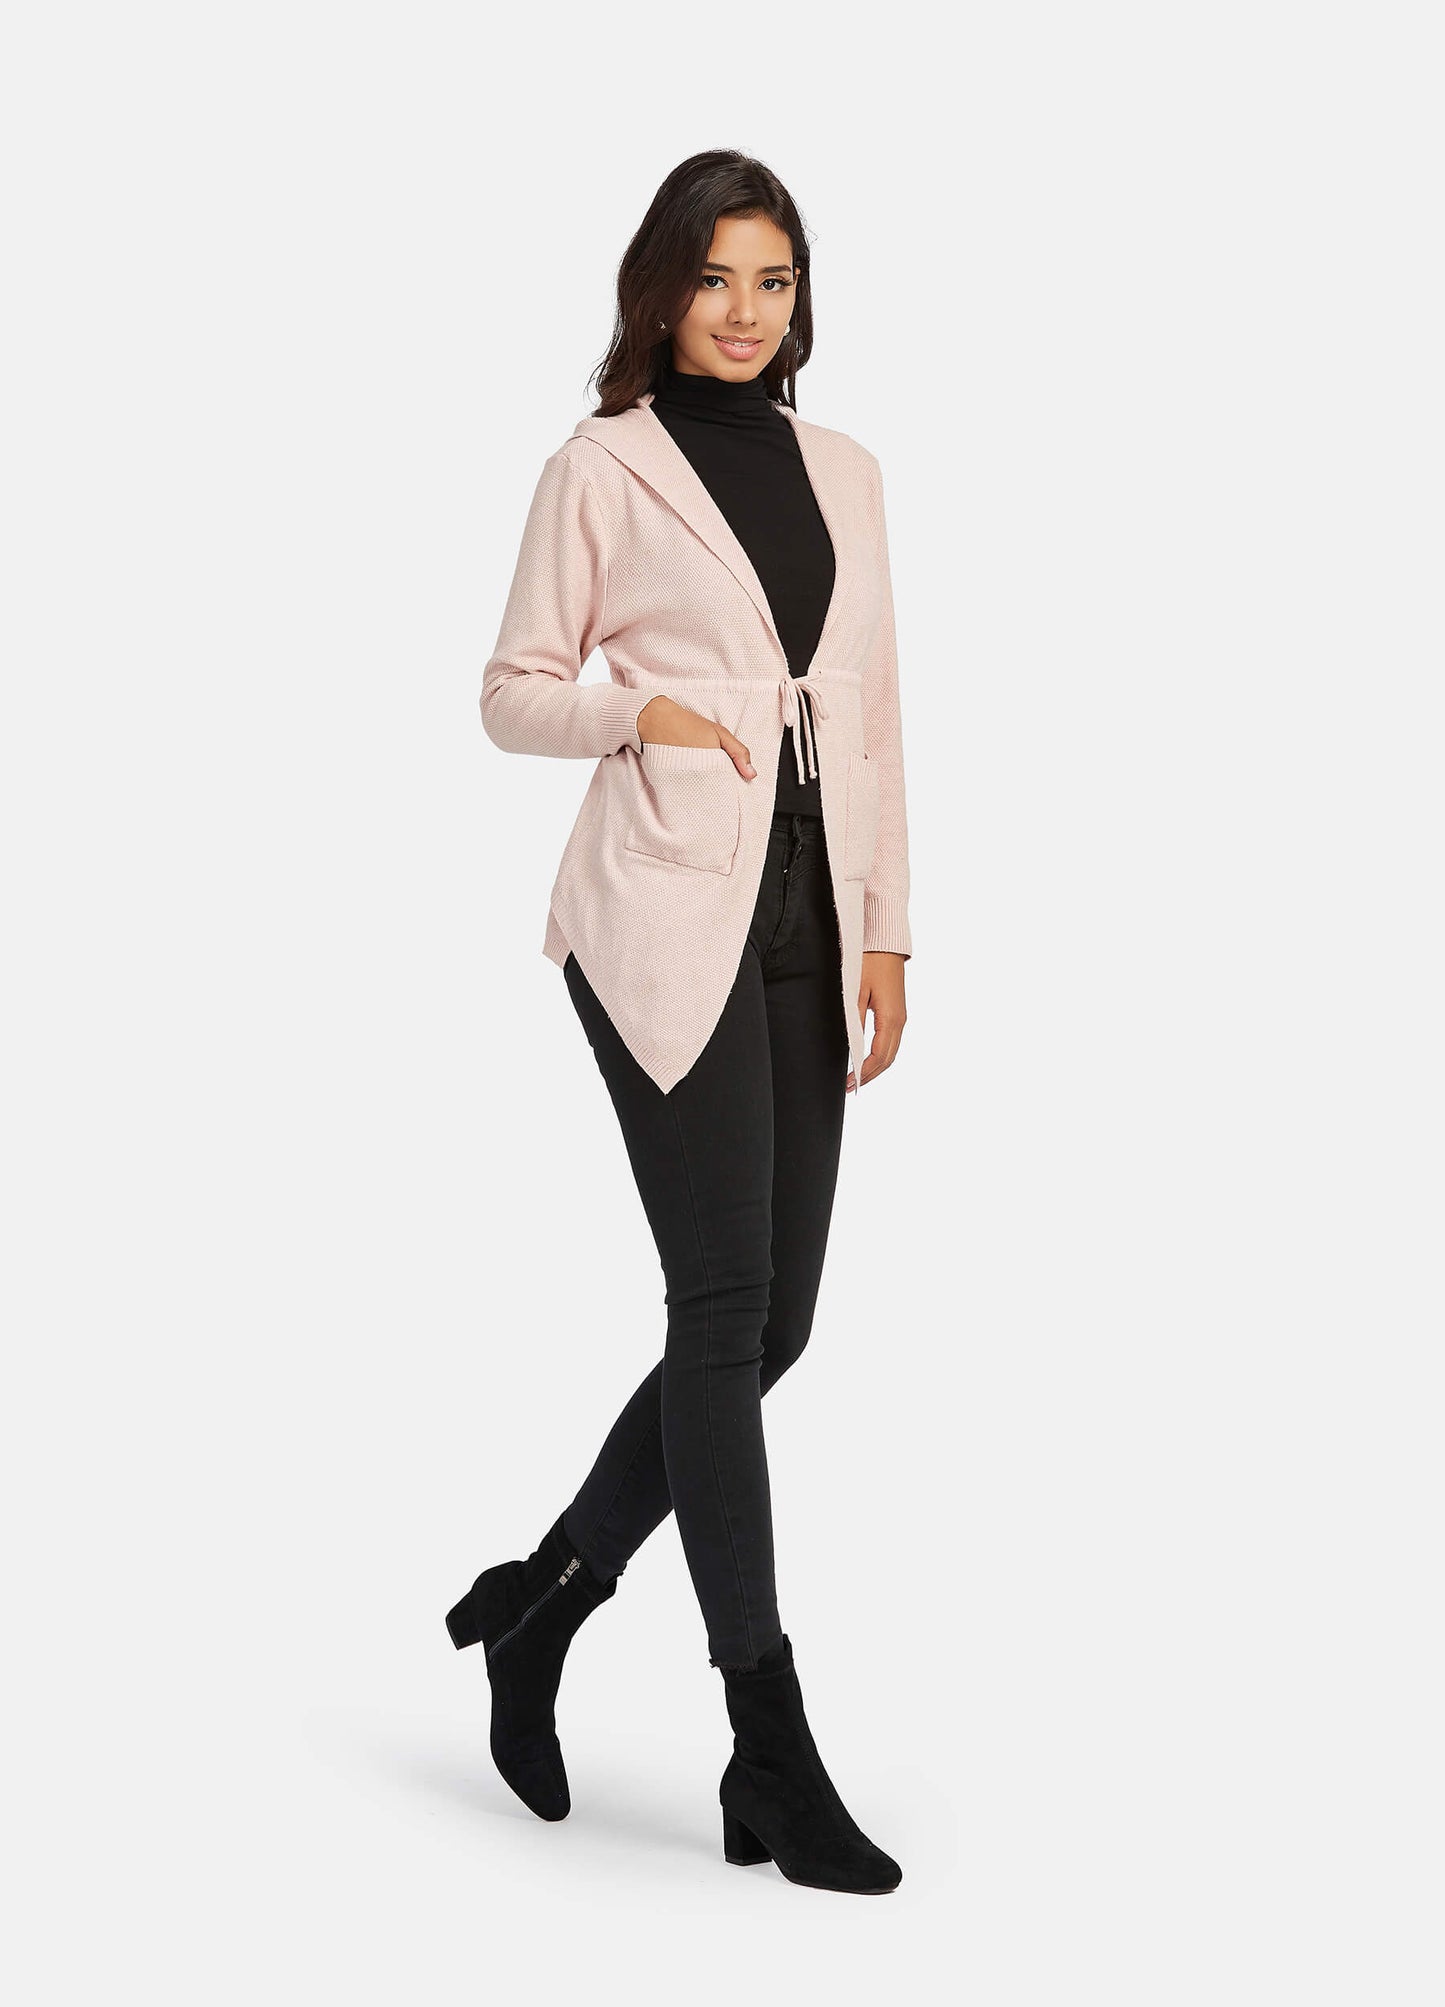 FINEPEEK Women's Long Sleeve Cable Knit Hooded Pink Cardigan